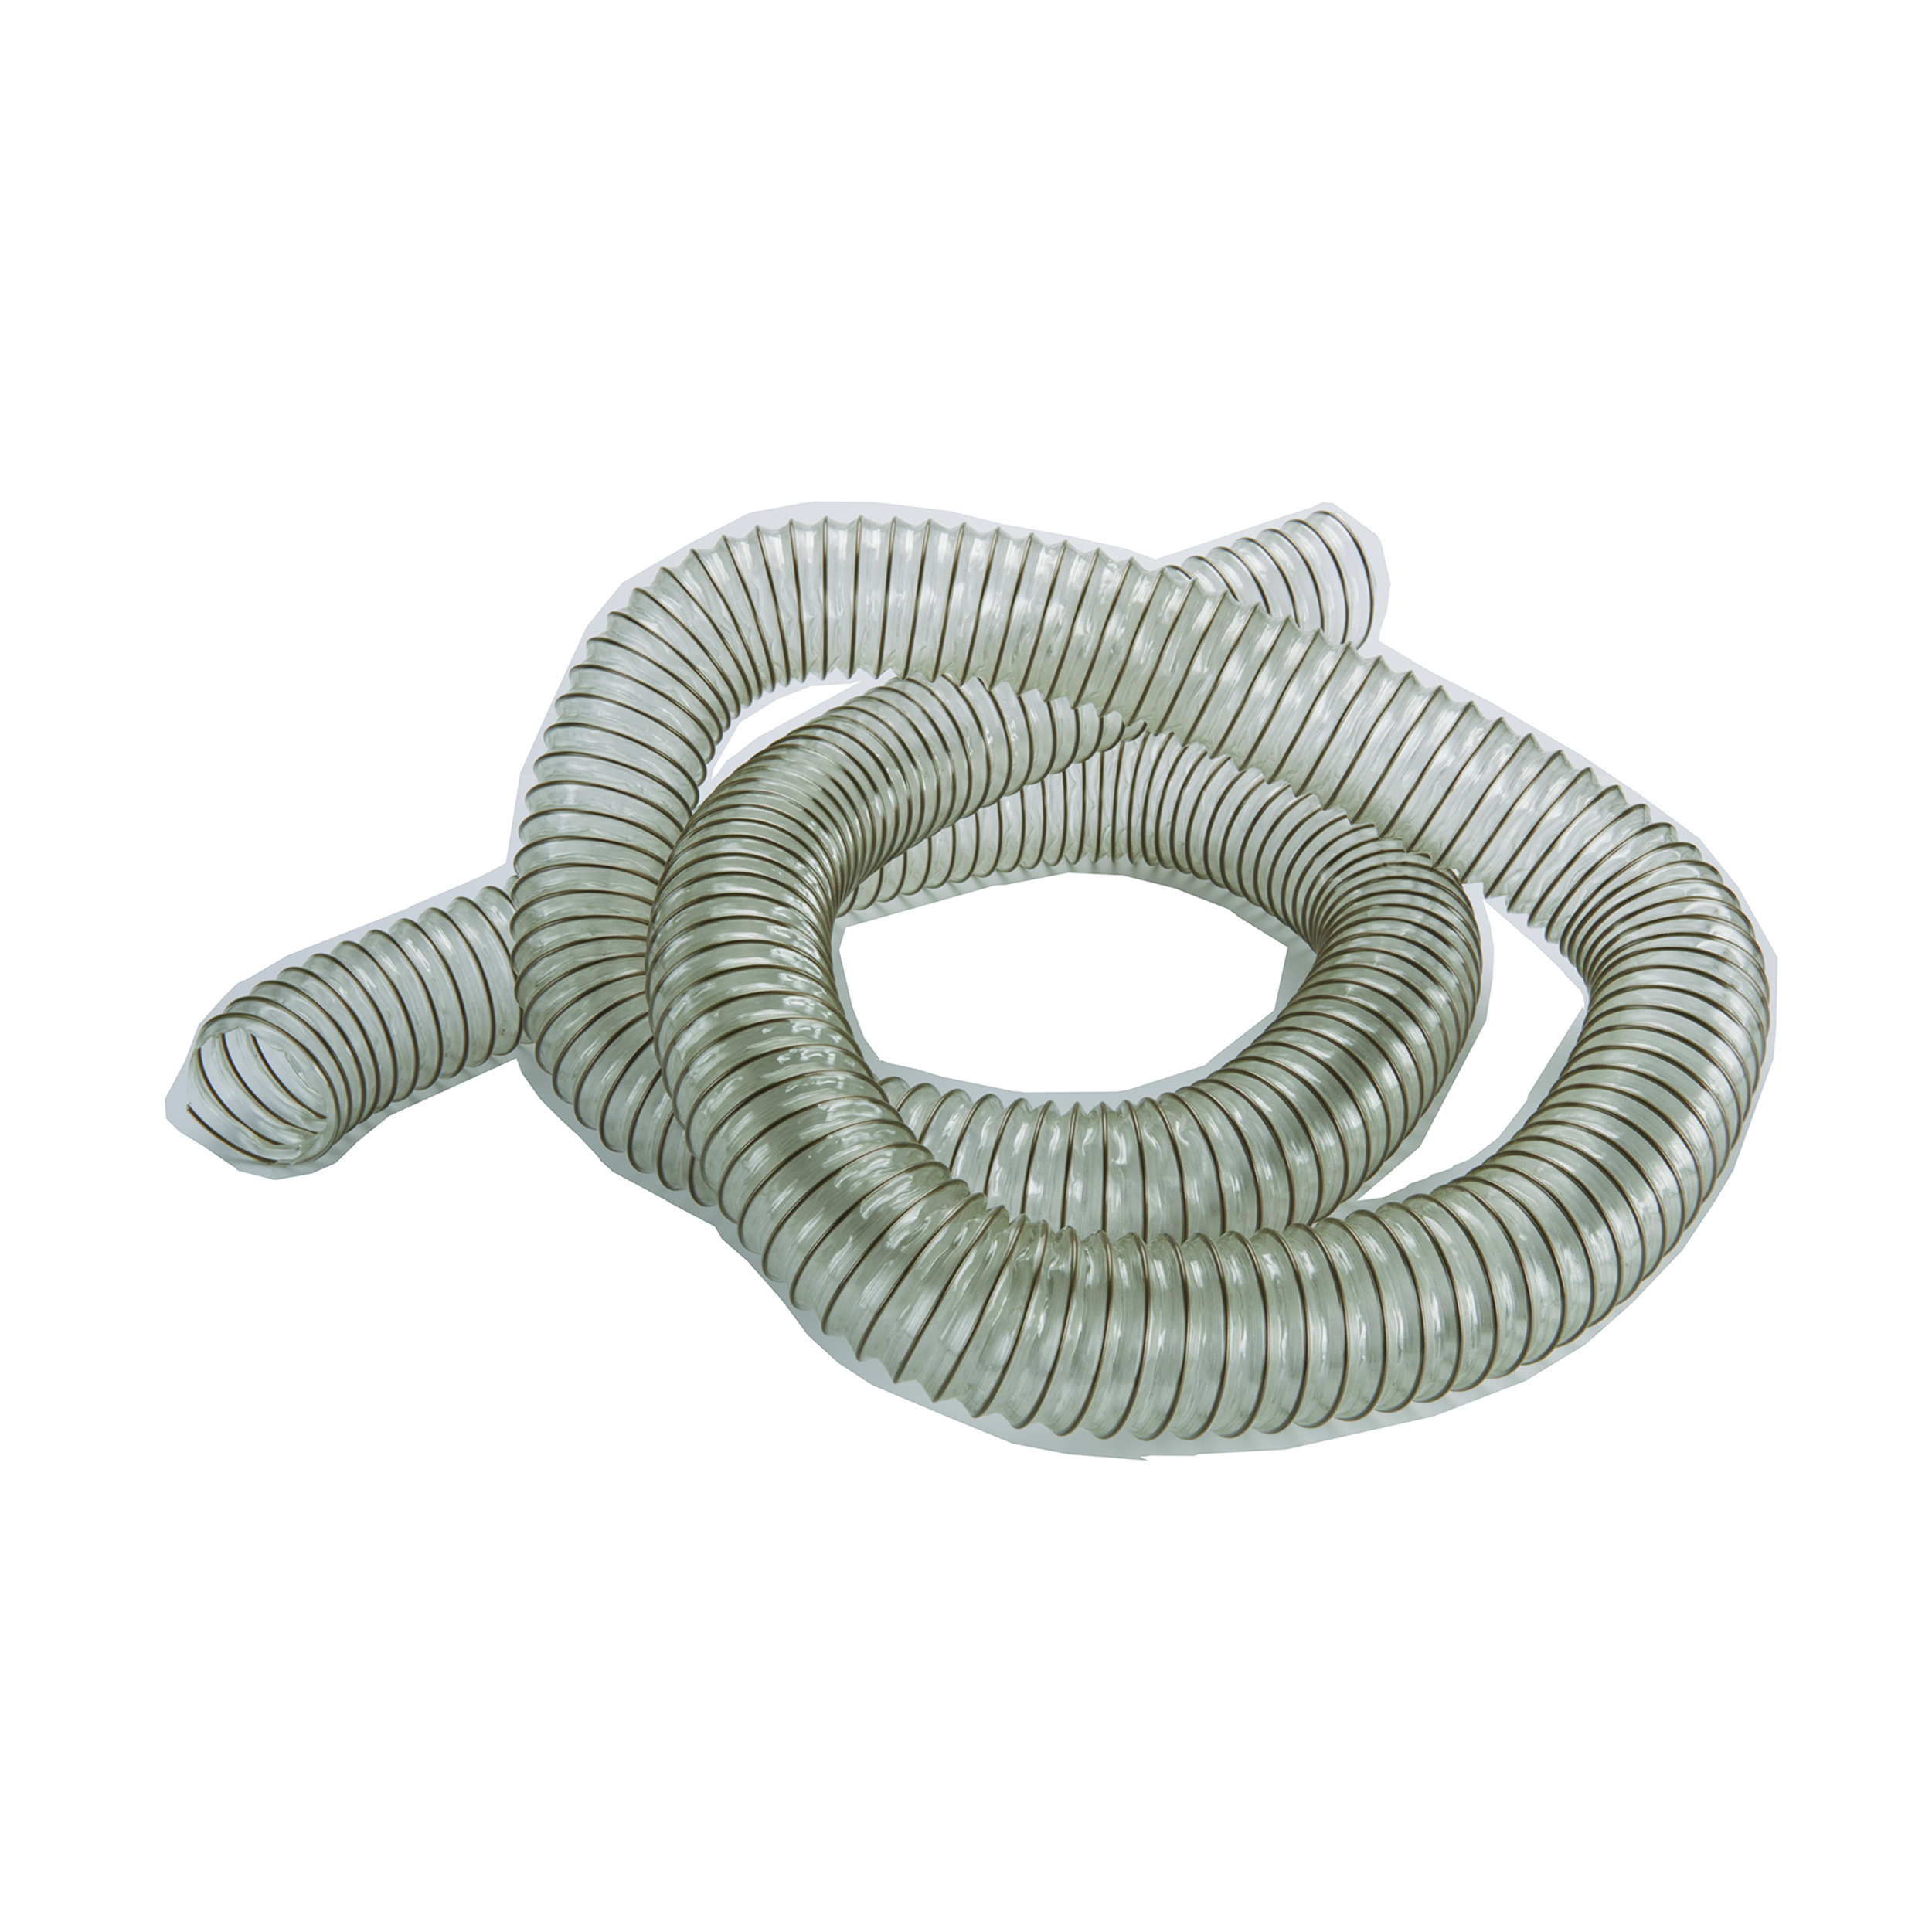 Hi-tech Duravent 2-1/2in X 10ft Uld Urethane Dust Collection Hose